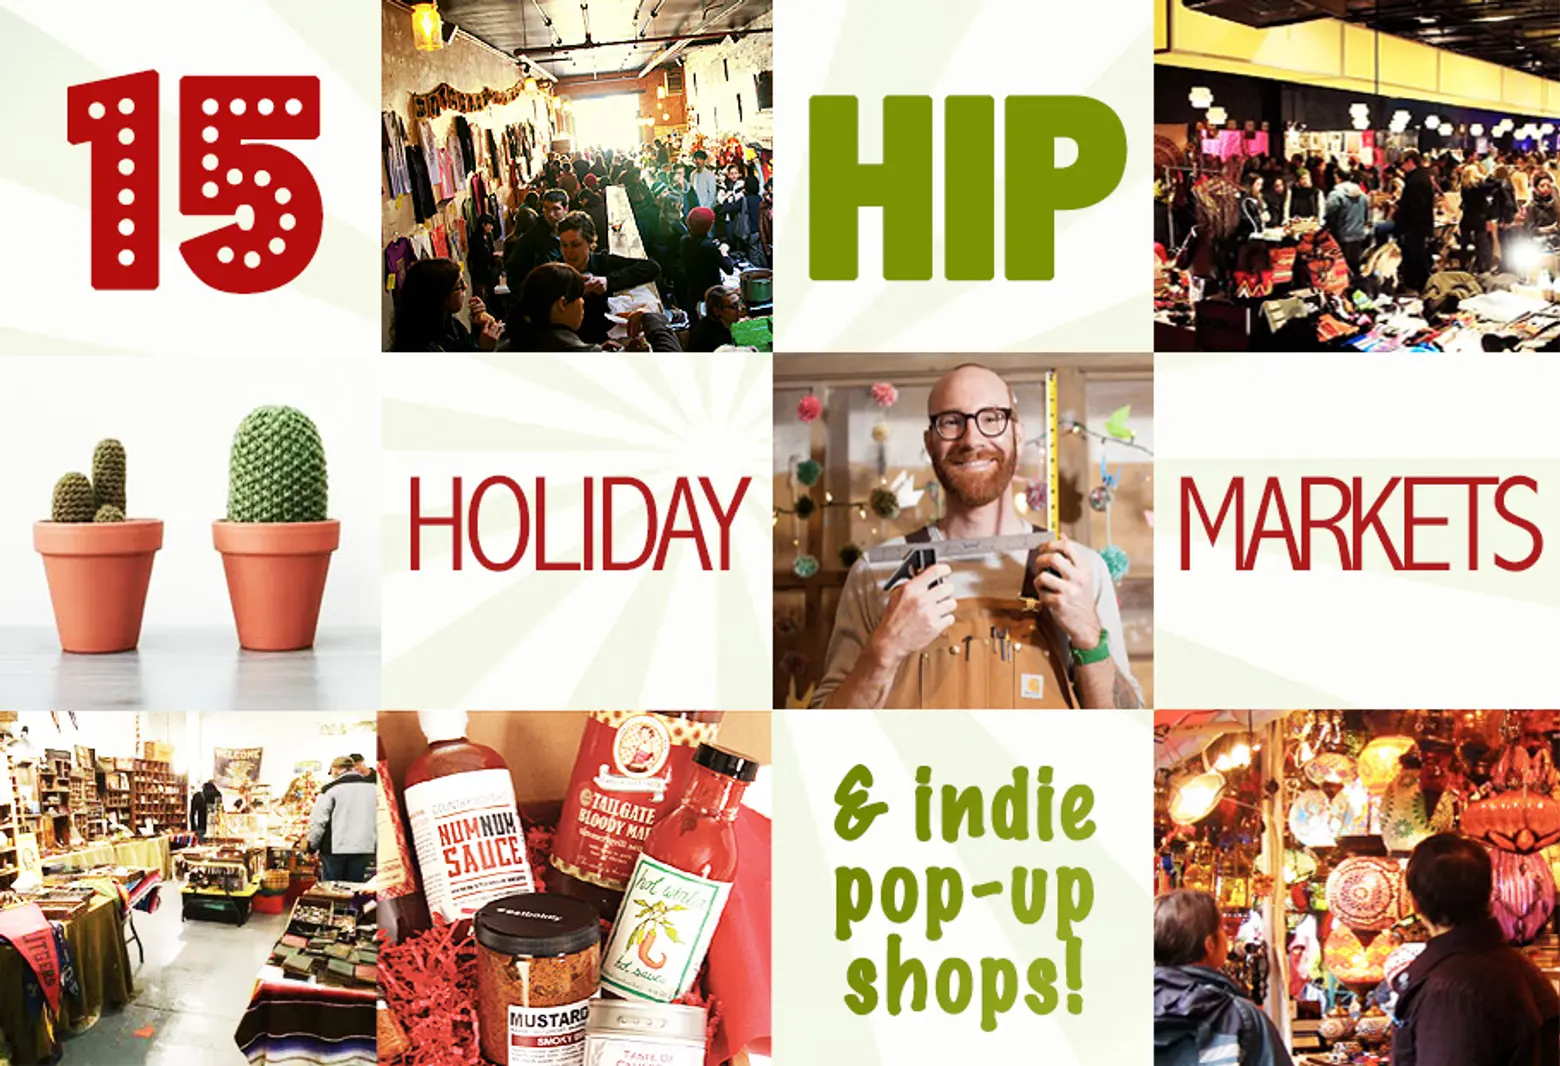 15 Hip Holiday Markets and Indie Pop-Up Shops in NYC